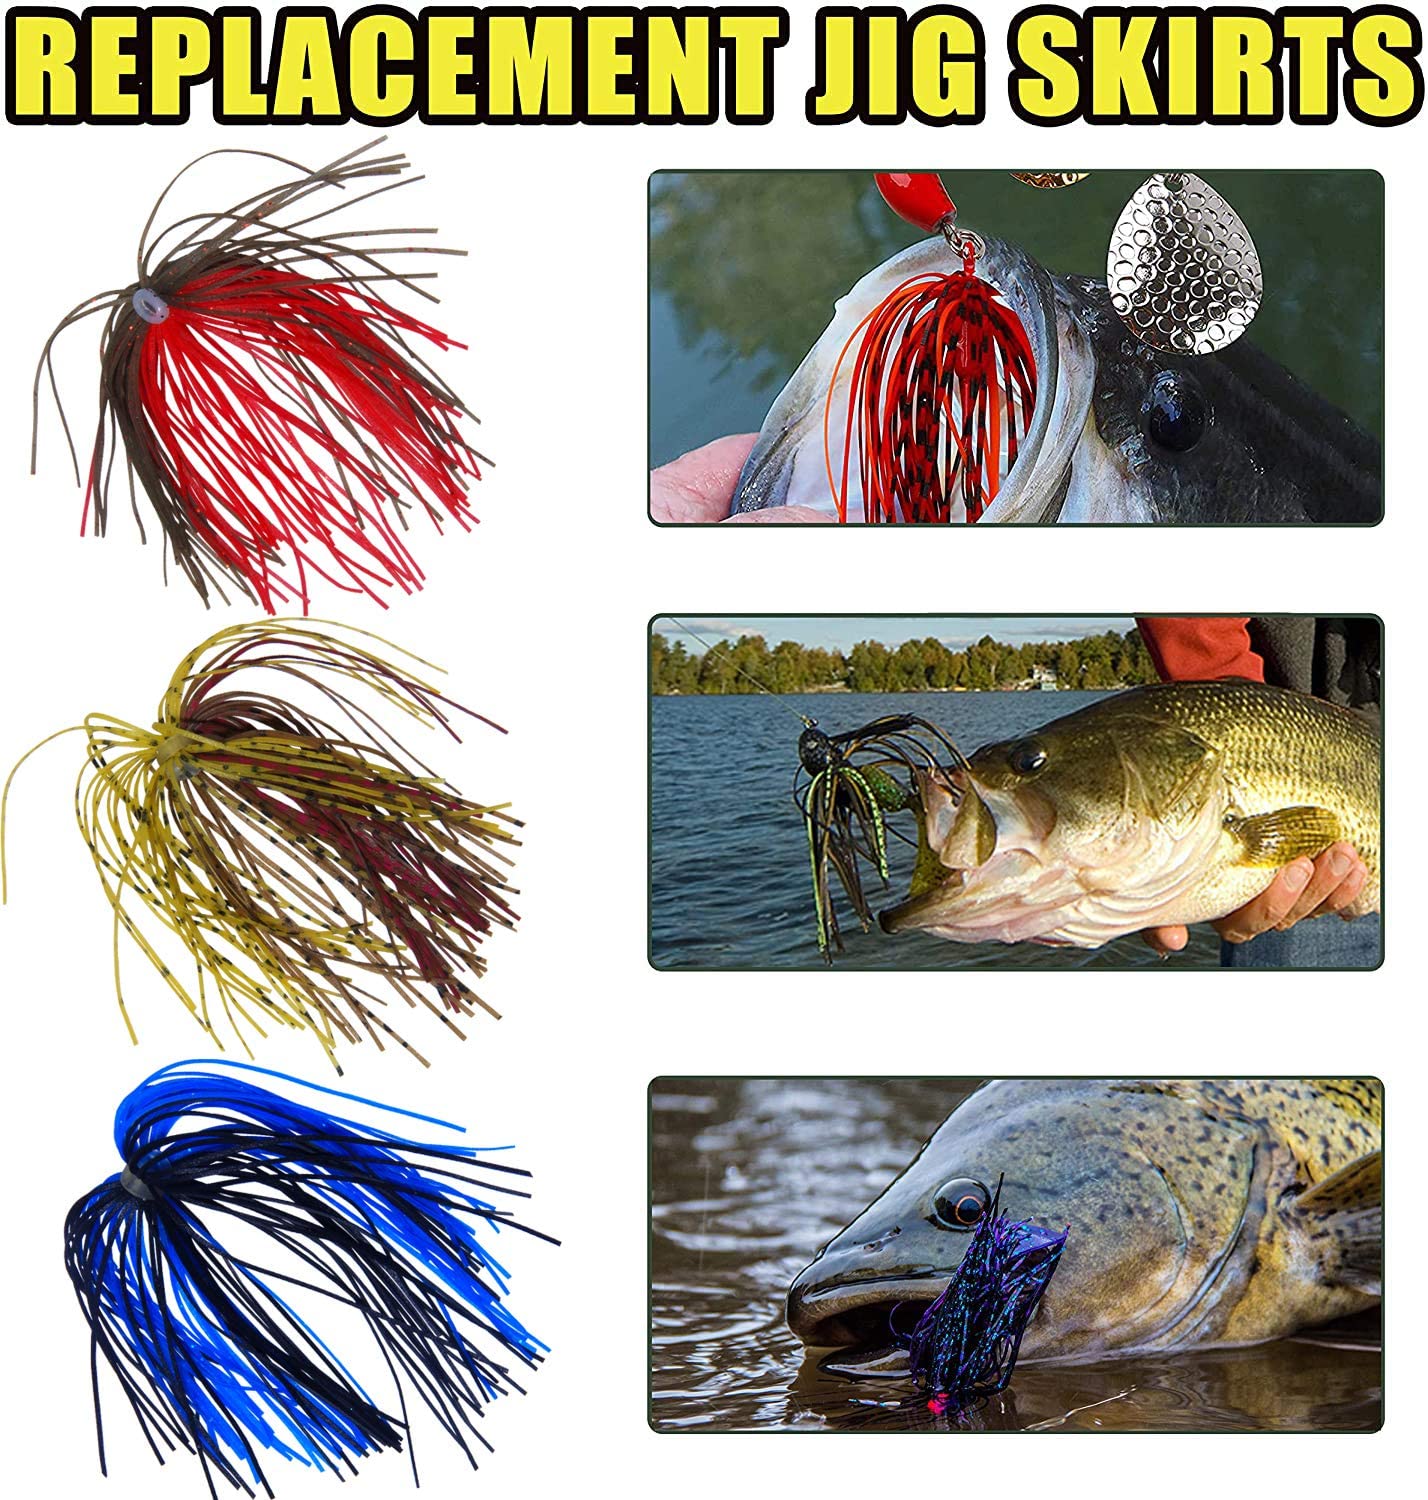 Silicone Jig Skirts Spinnerbait Replacement Skirt Double Arm Rattle 6/12  Bundles Rubber Bass Fishing Jigs Rattles Making kit for Fishing baits/Lures